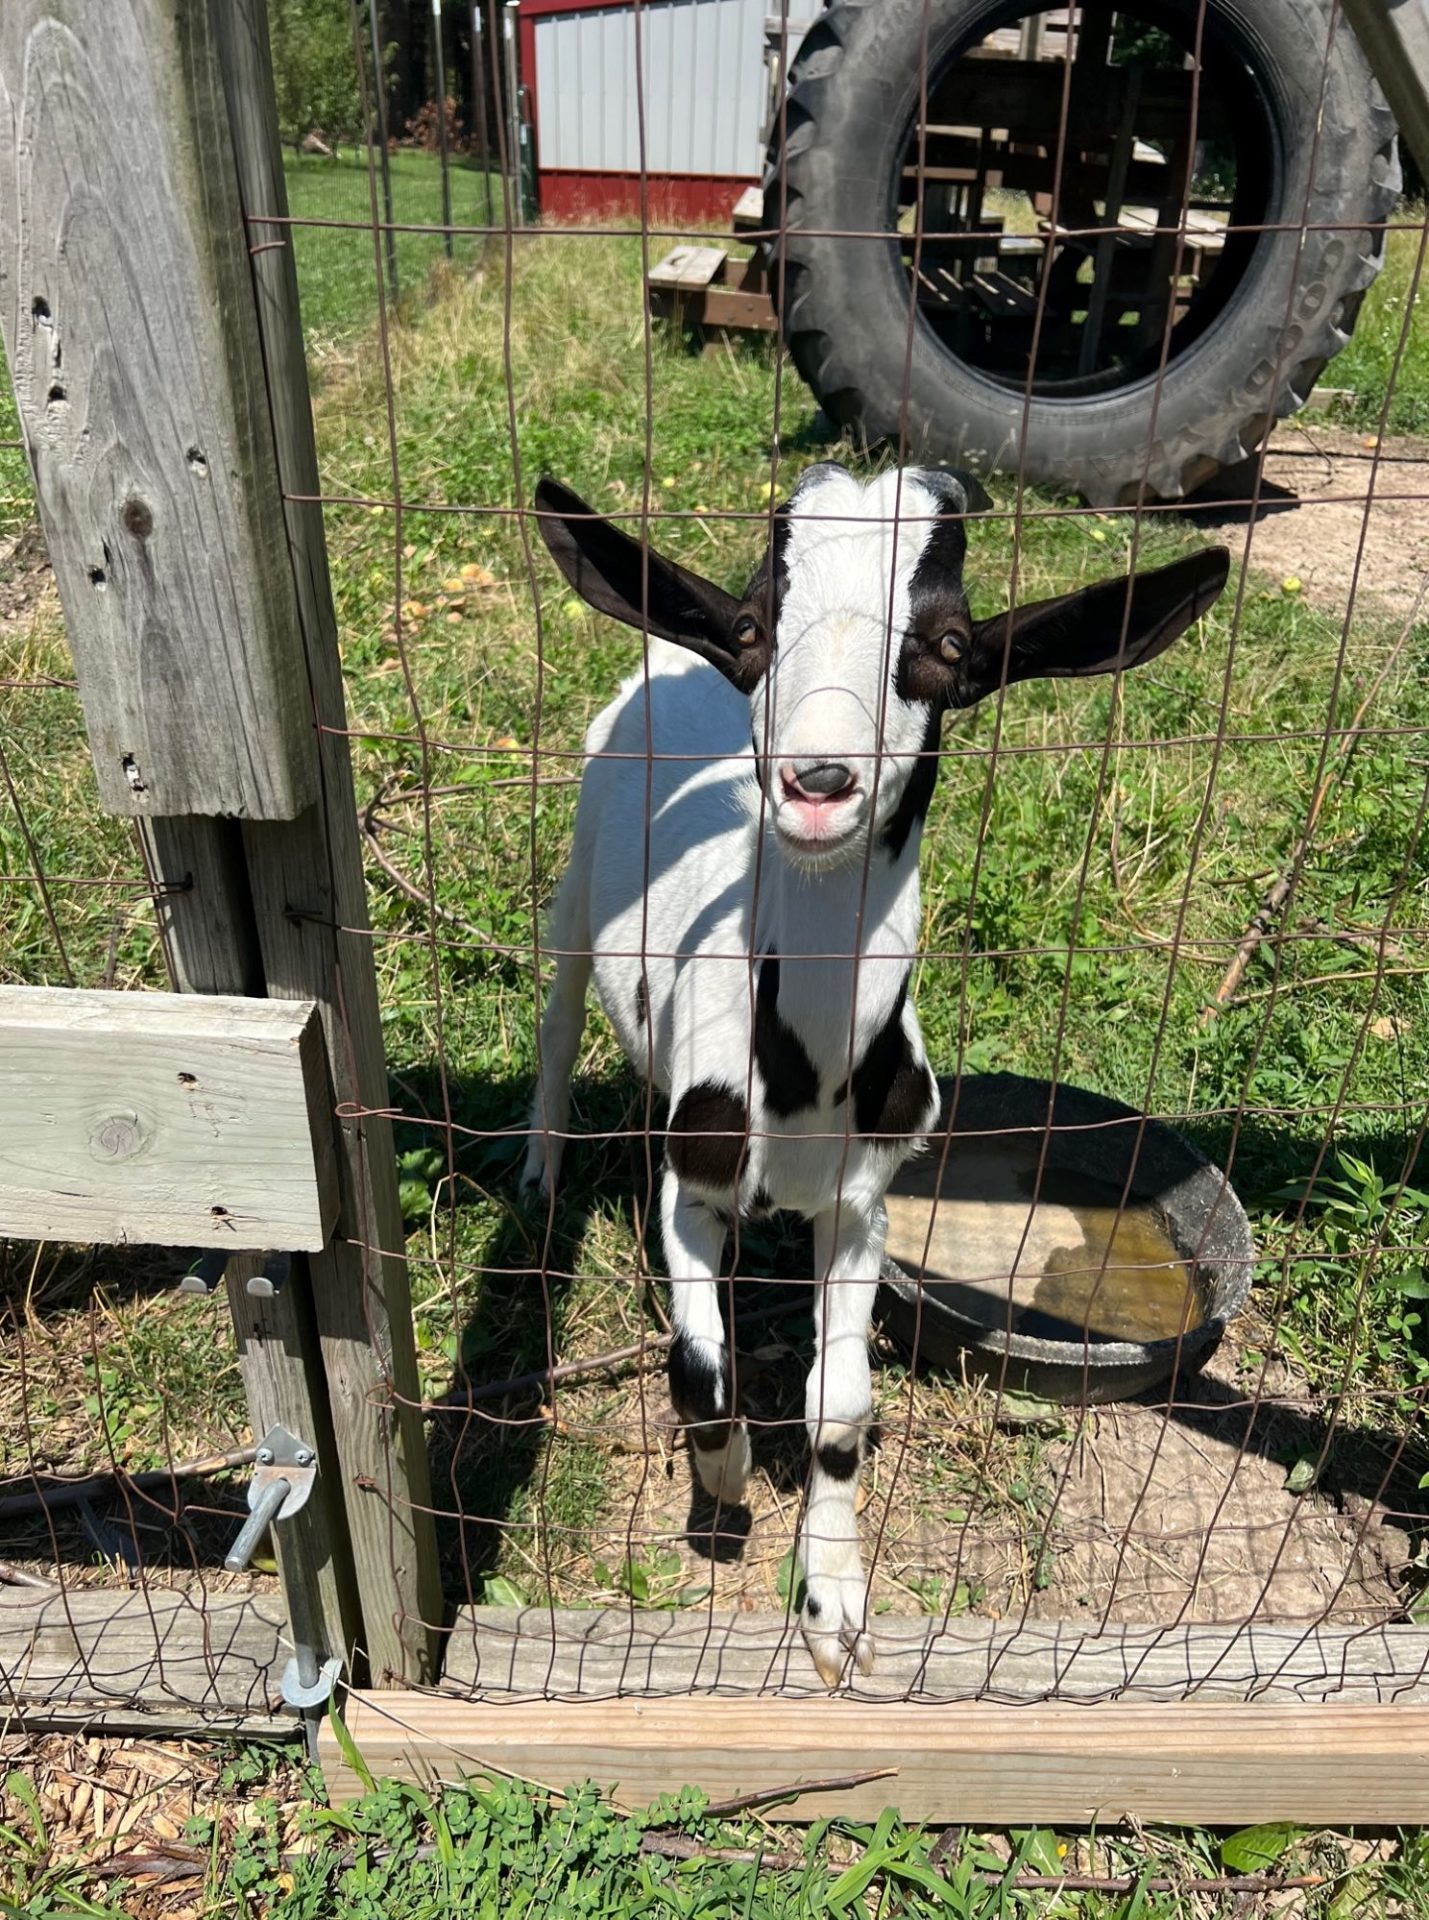 A white and black goat is looking through a wire fence, standing alongside a black tray of water.